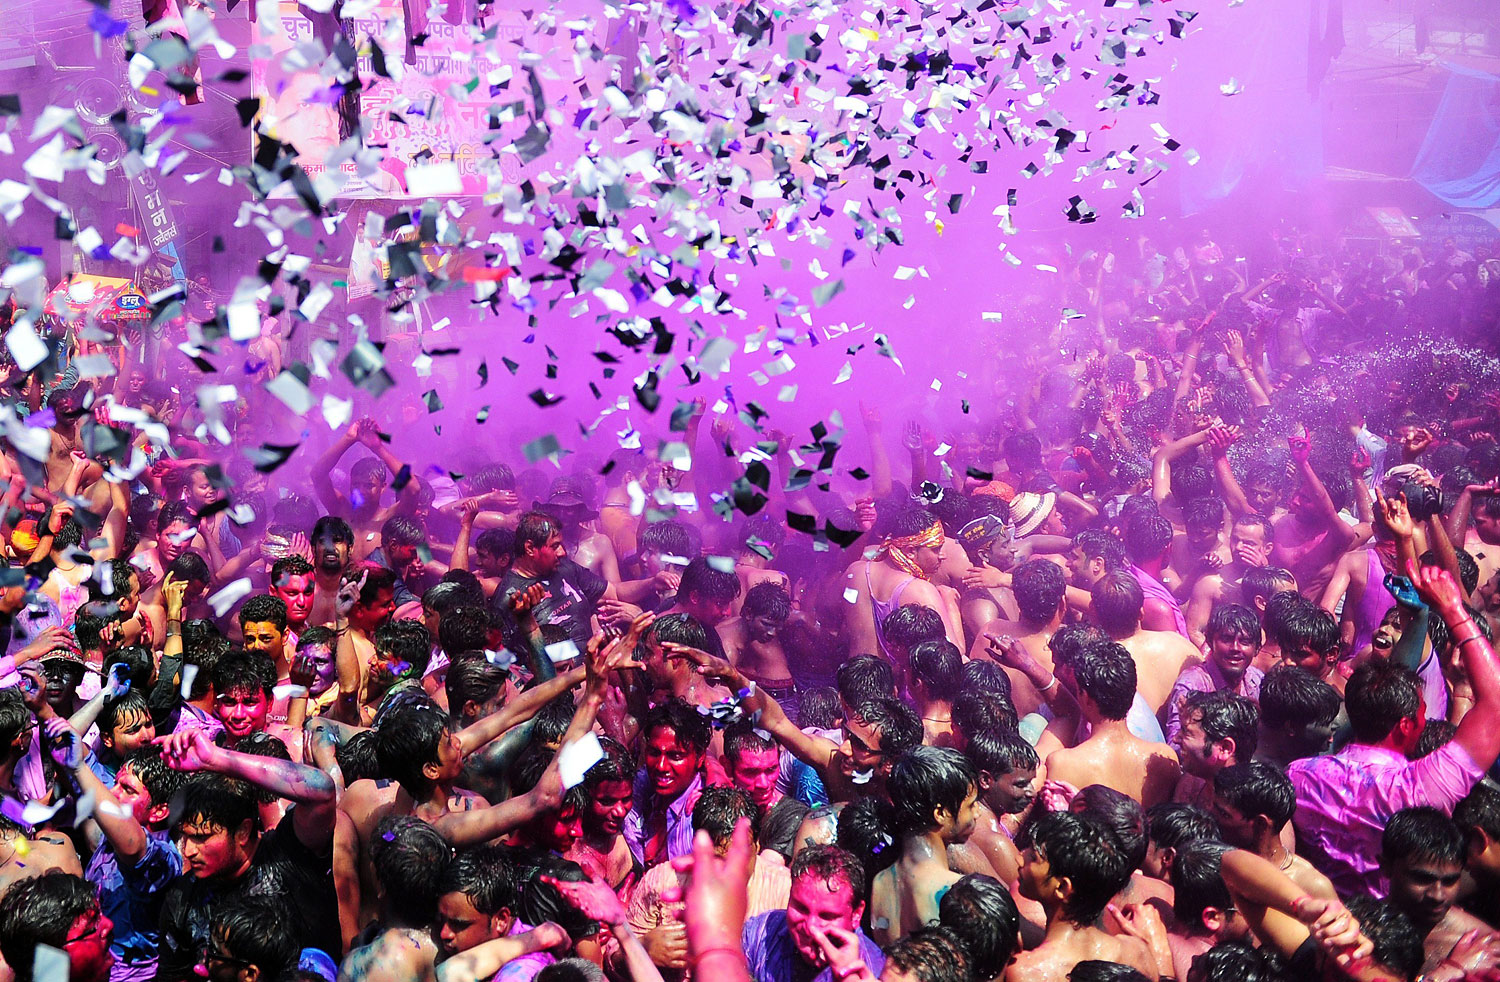 Indian revellers covered in coloured powder dance during Holi festival celebrations in Allahabad on March 17, 2014.